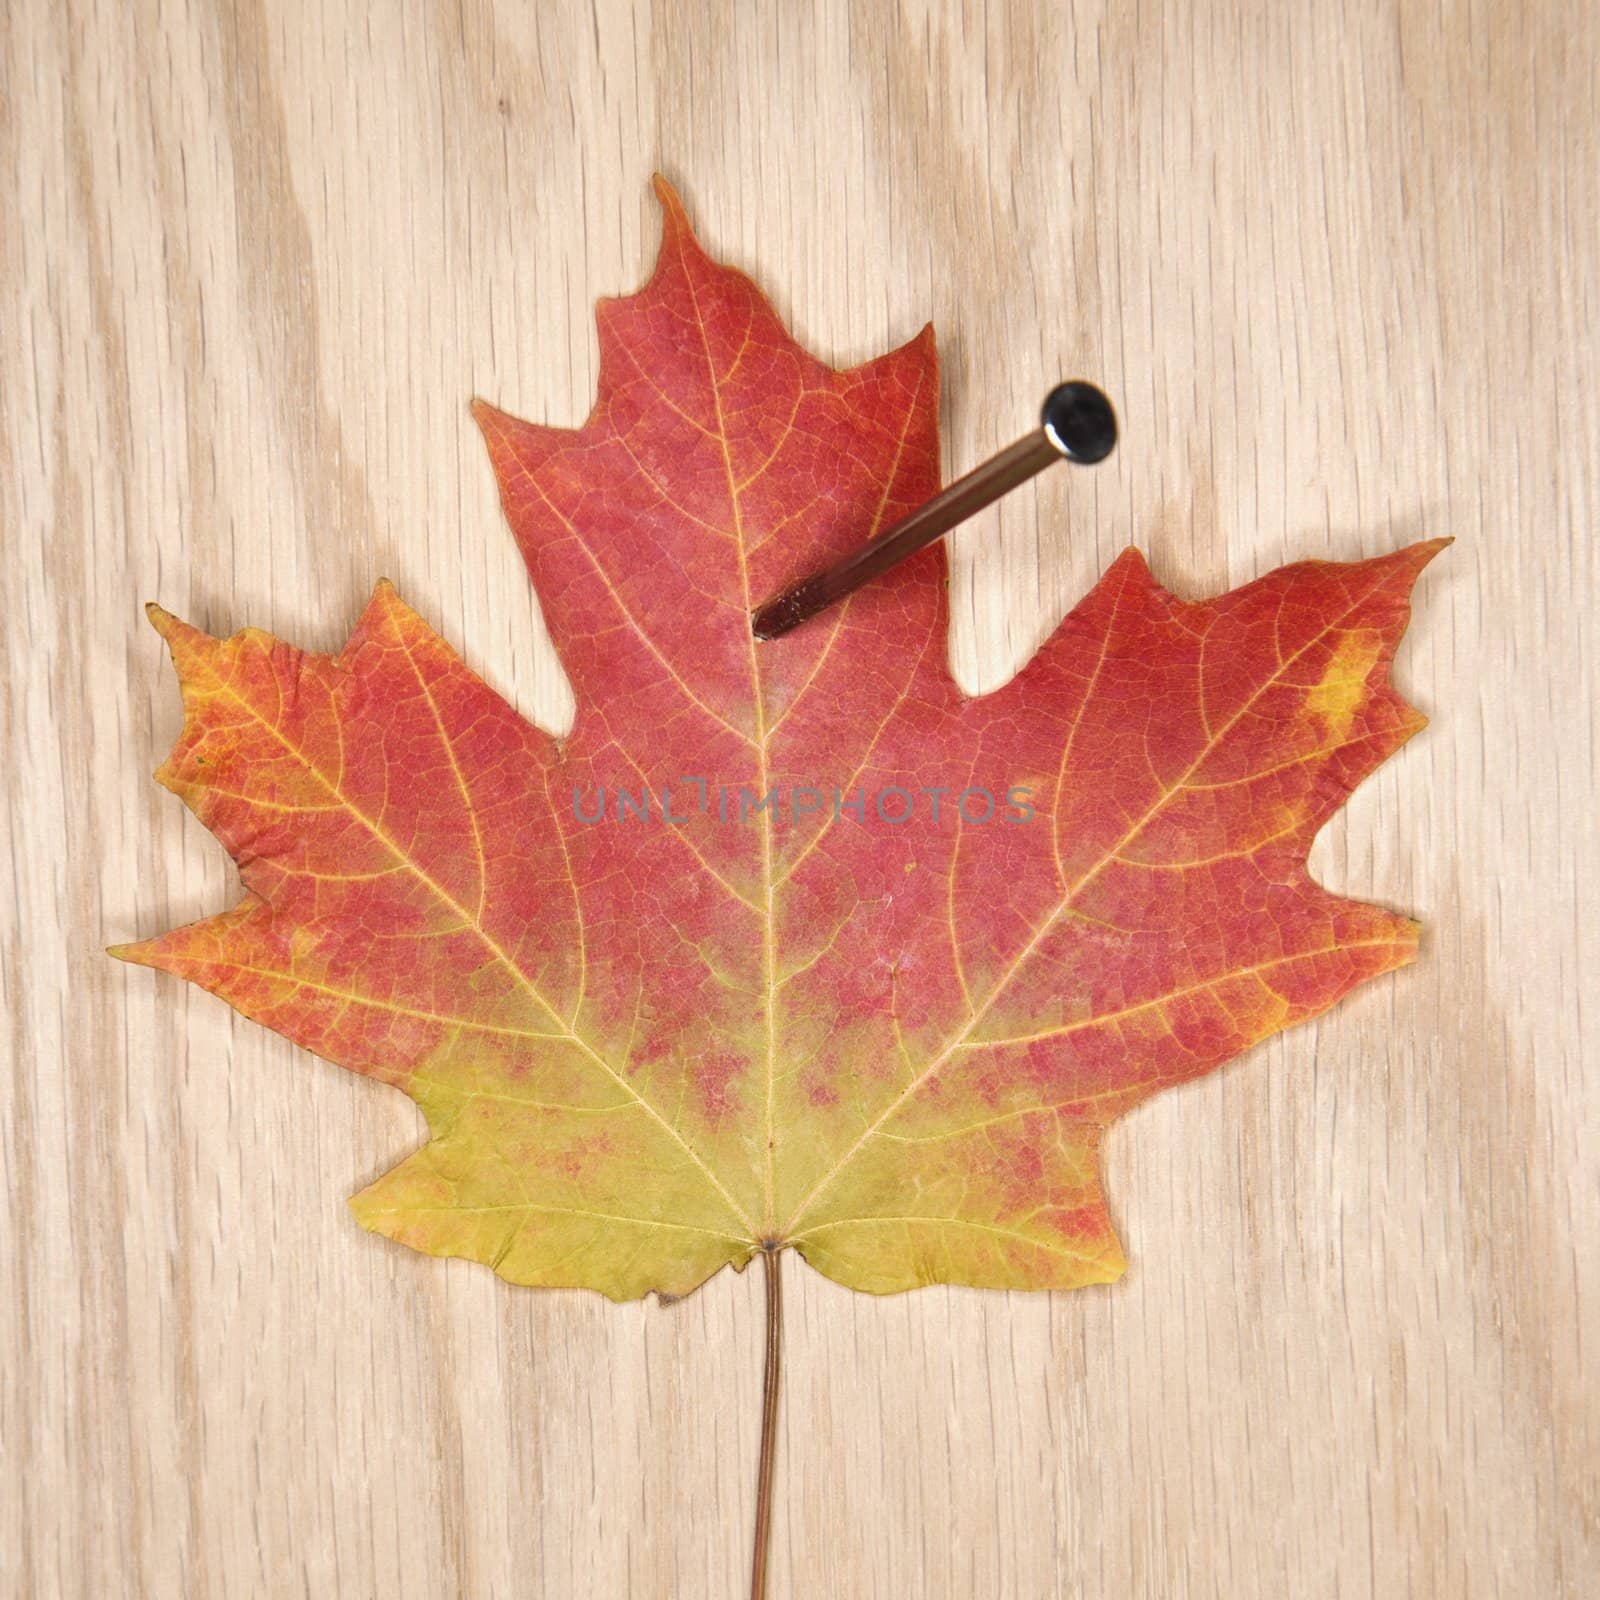 Red and green Maple leaf nailed to board.